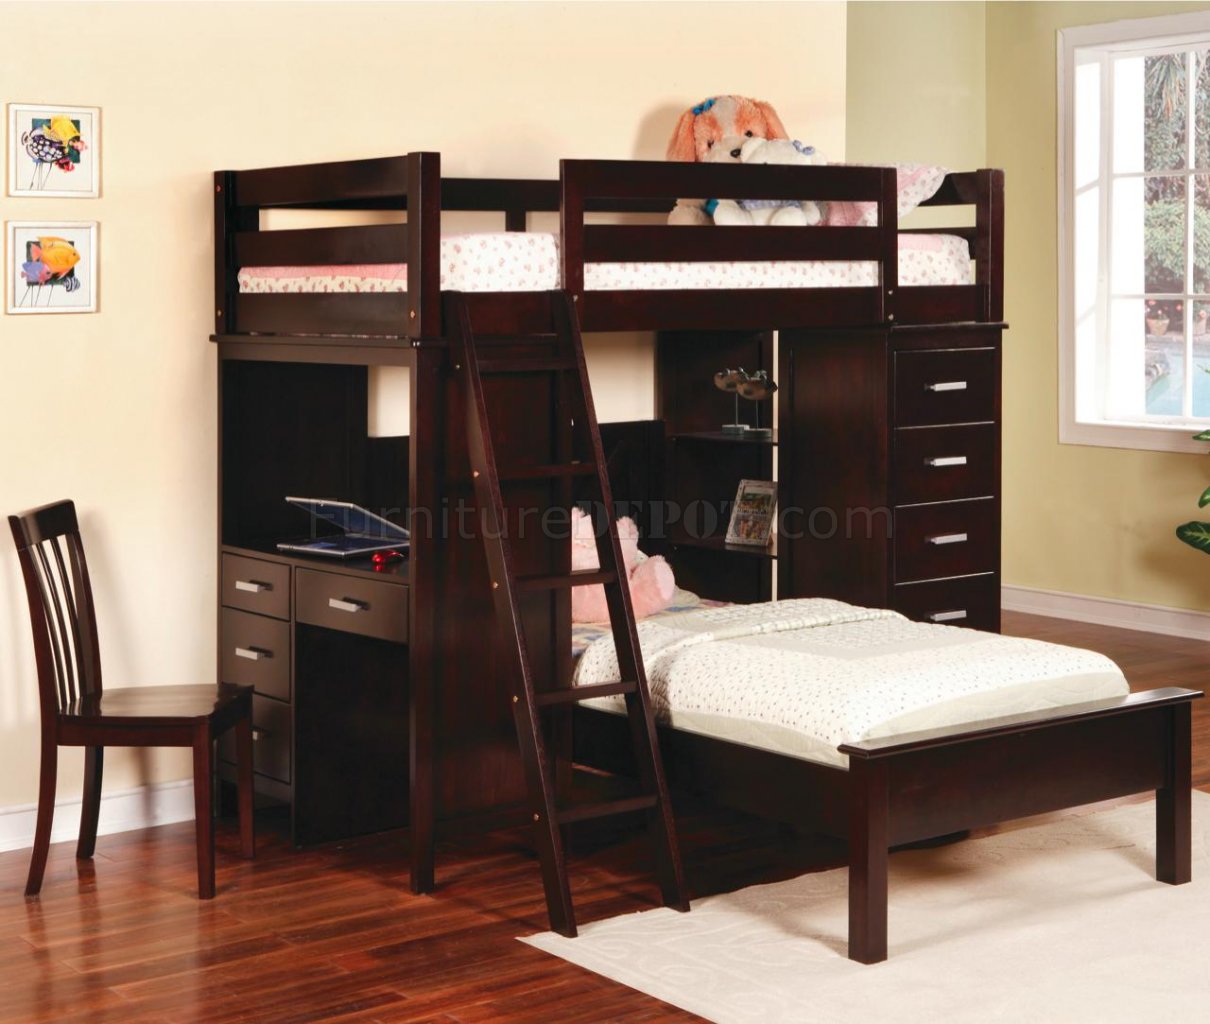 Rich Cappuccino Finish Modern Bunk Bed w/Desk & Chair CRKB 460123